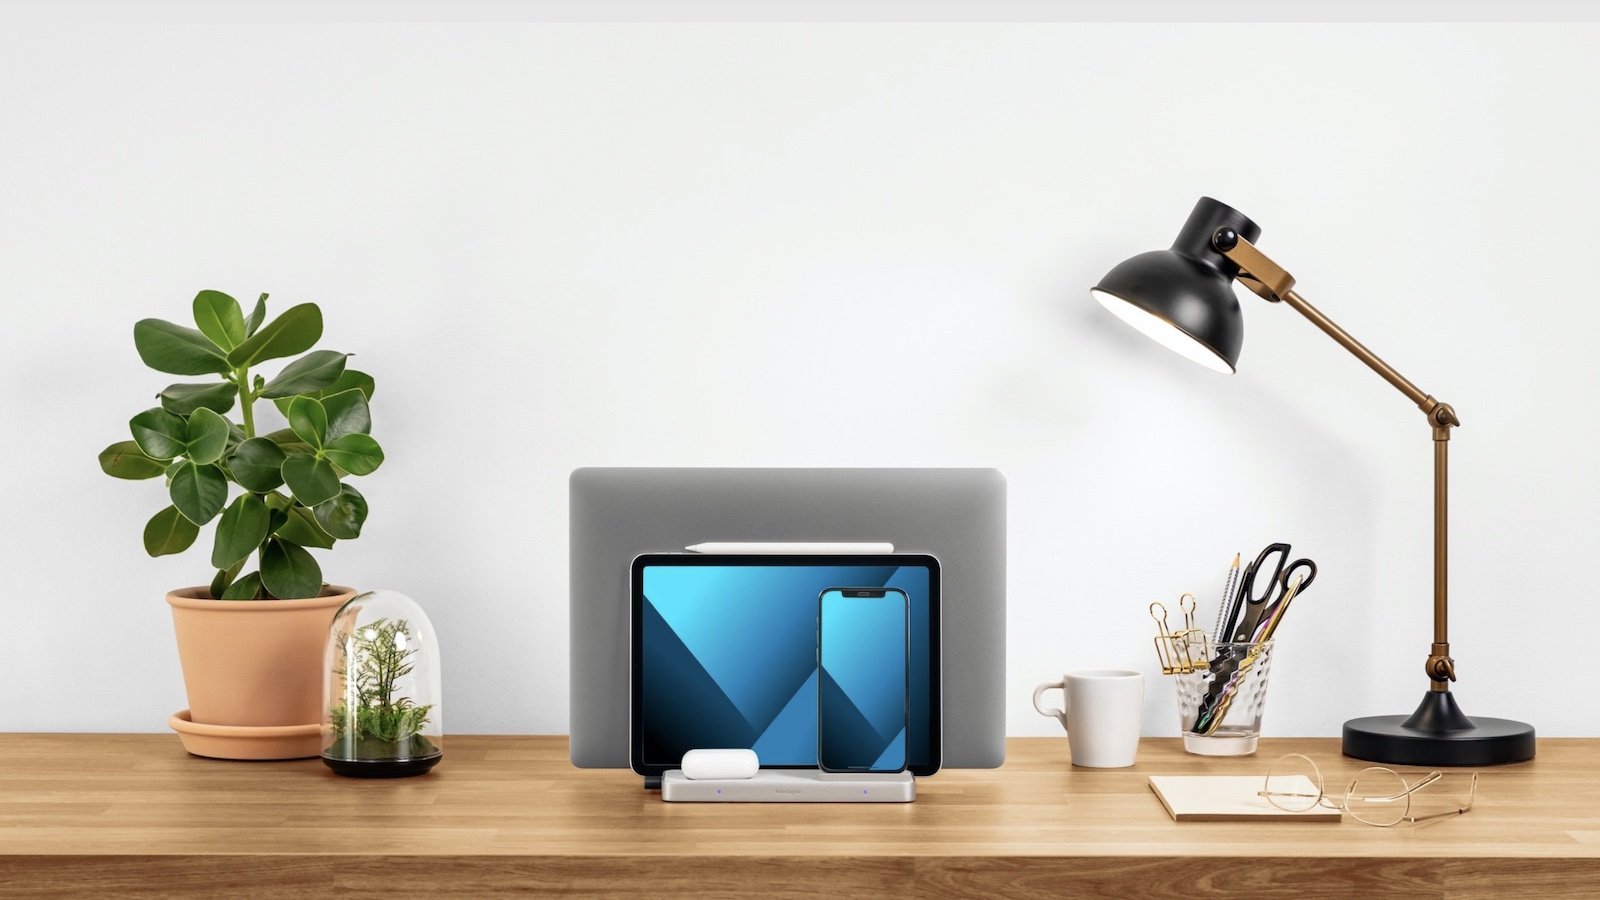 Kensington StudioCaddy Apple device storage system supports your entire Apple ecosystem